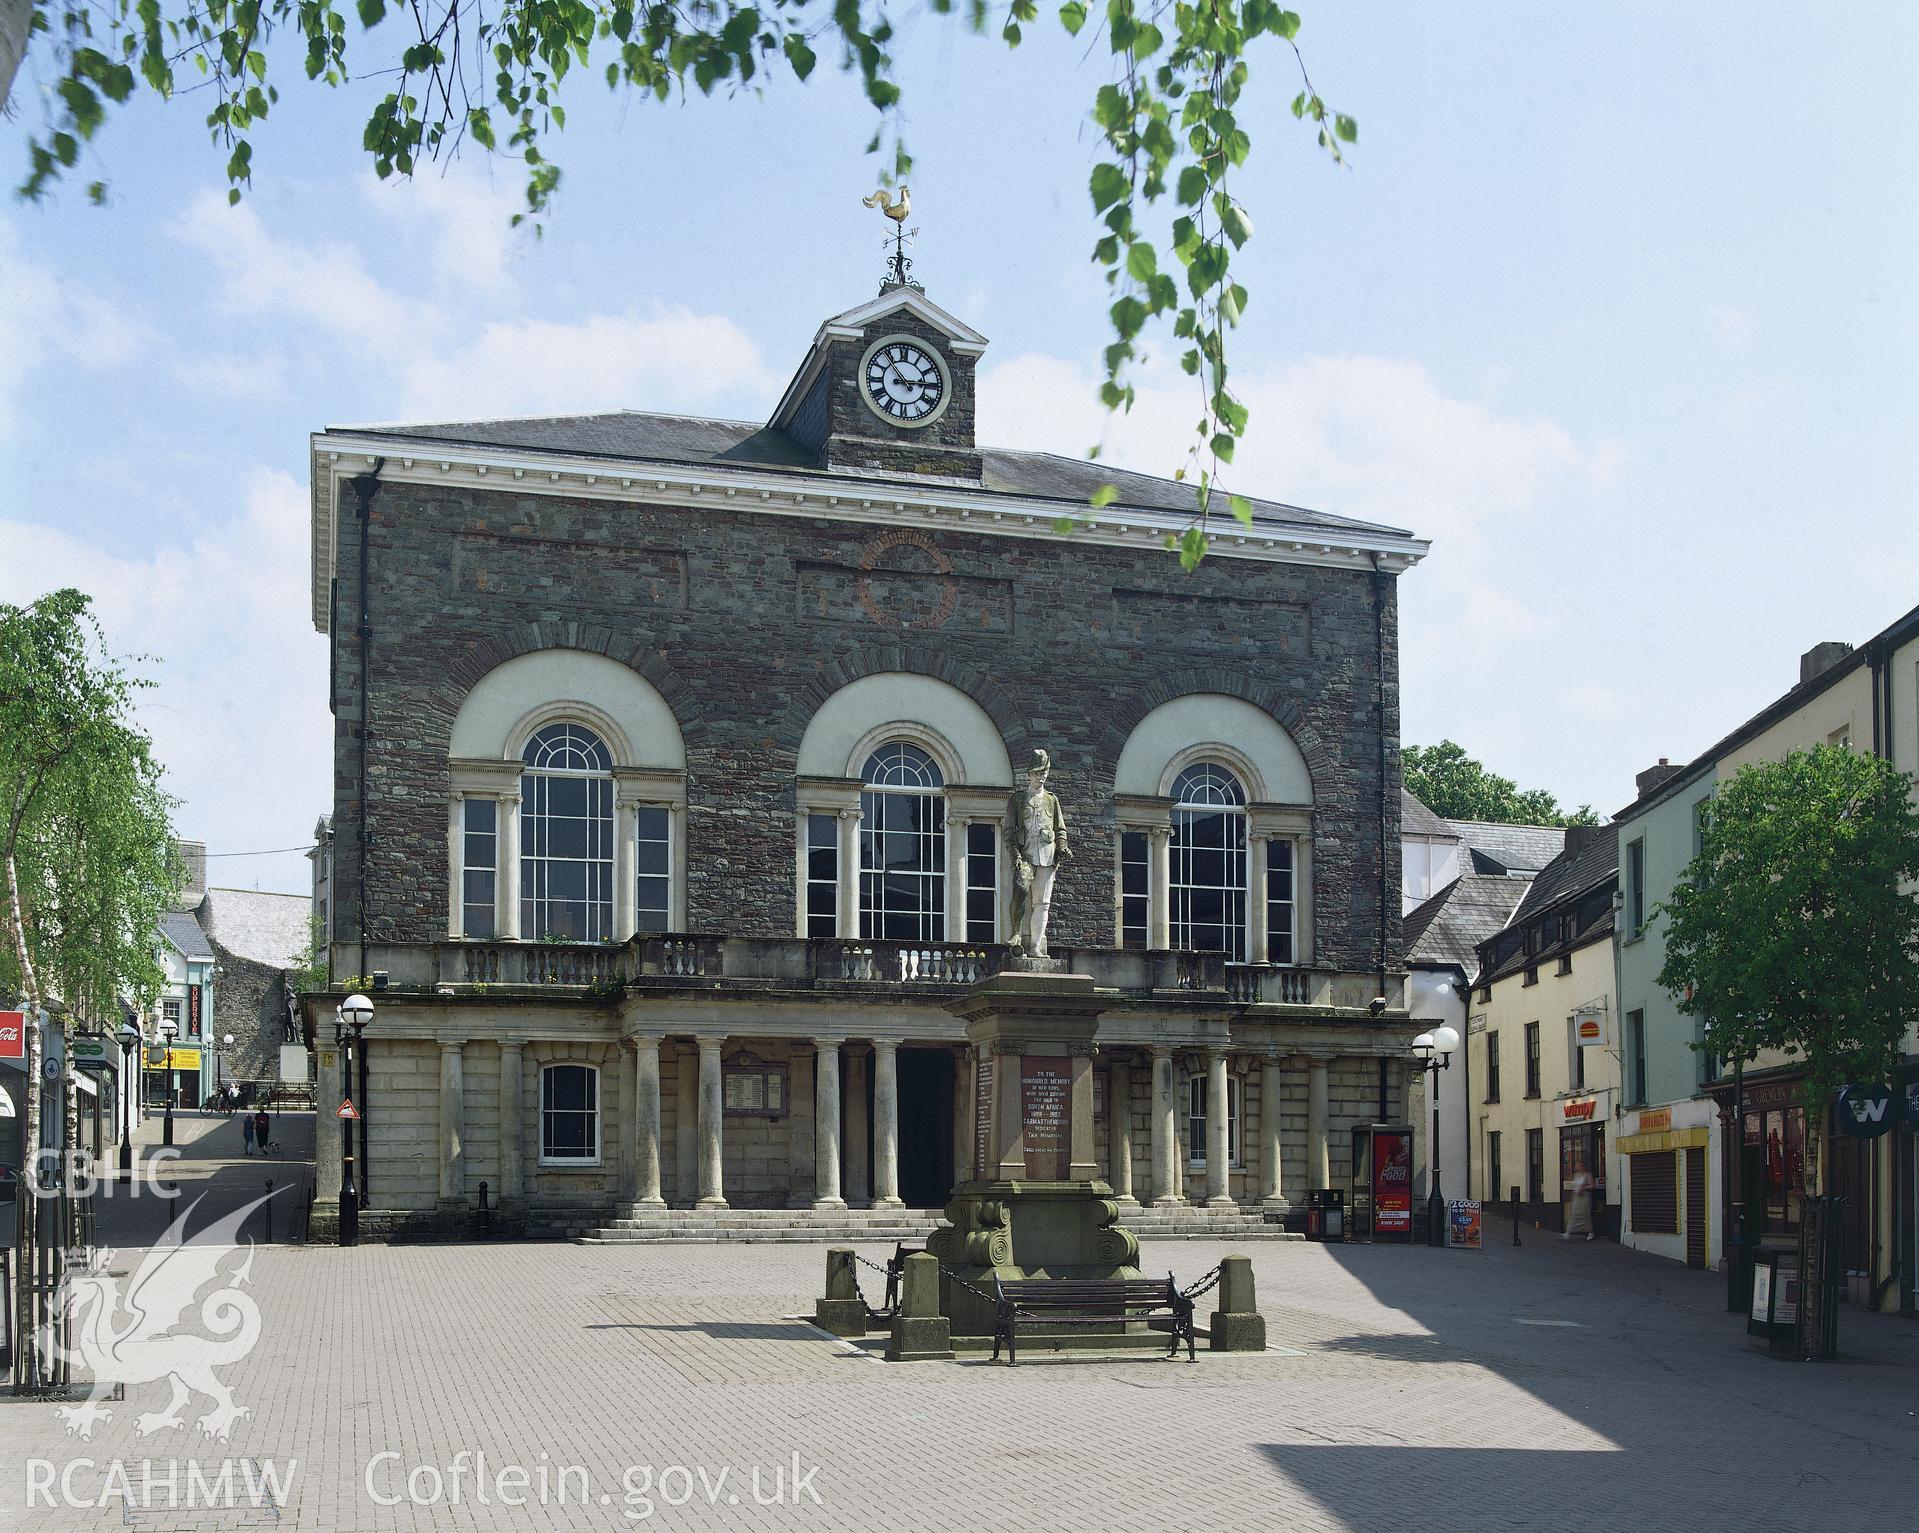 RCAHMW colour transparency showing exterior view of Guildhall, Carmarthen.